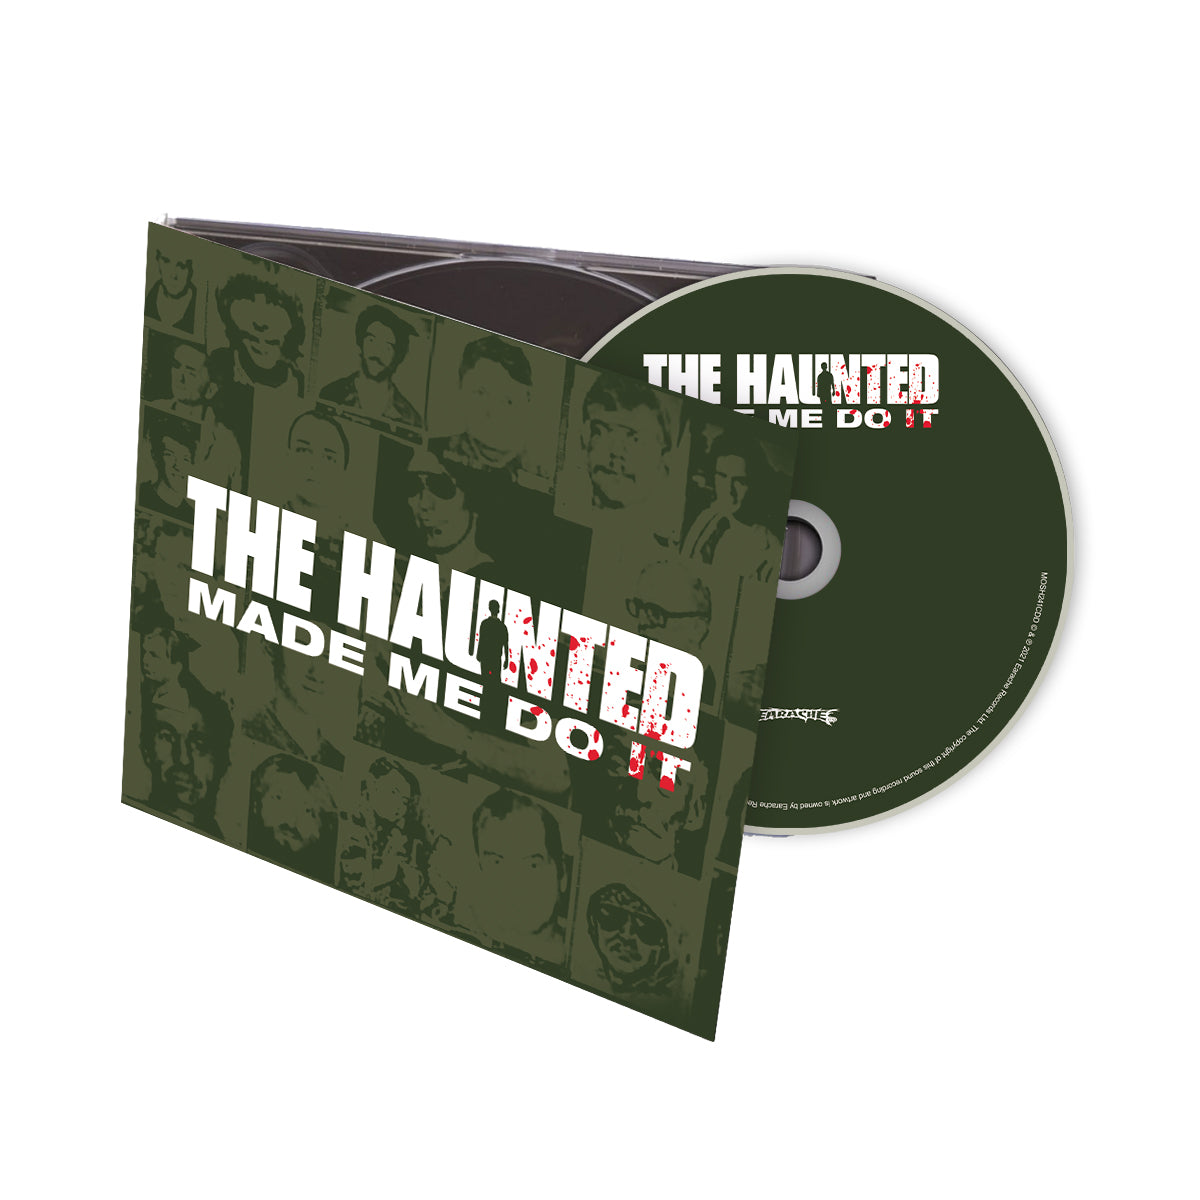 The Haunted "The Haunted Made Me Do It" Digipak CD